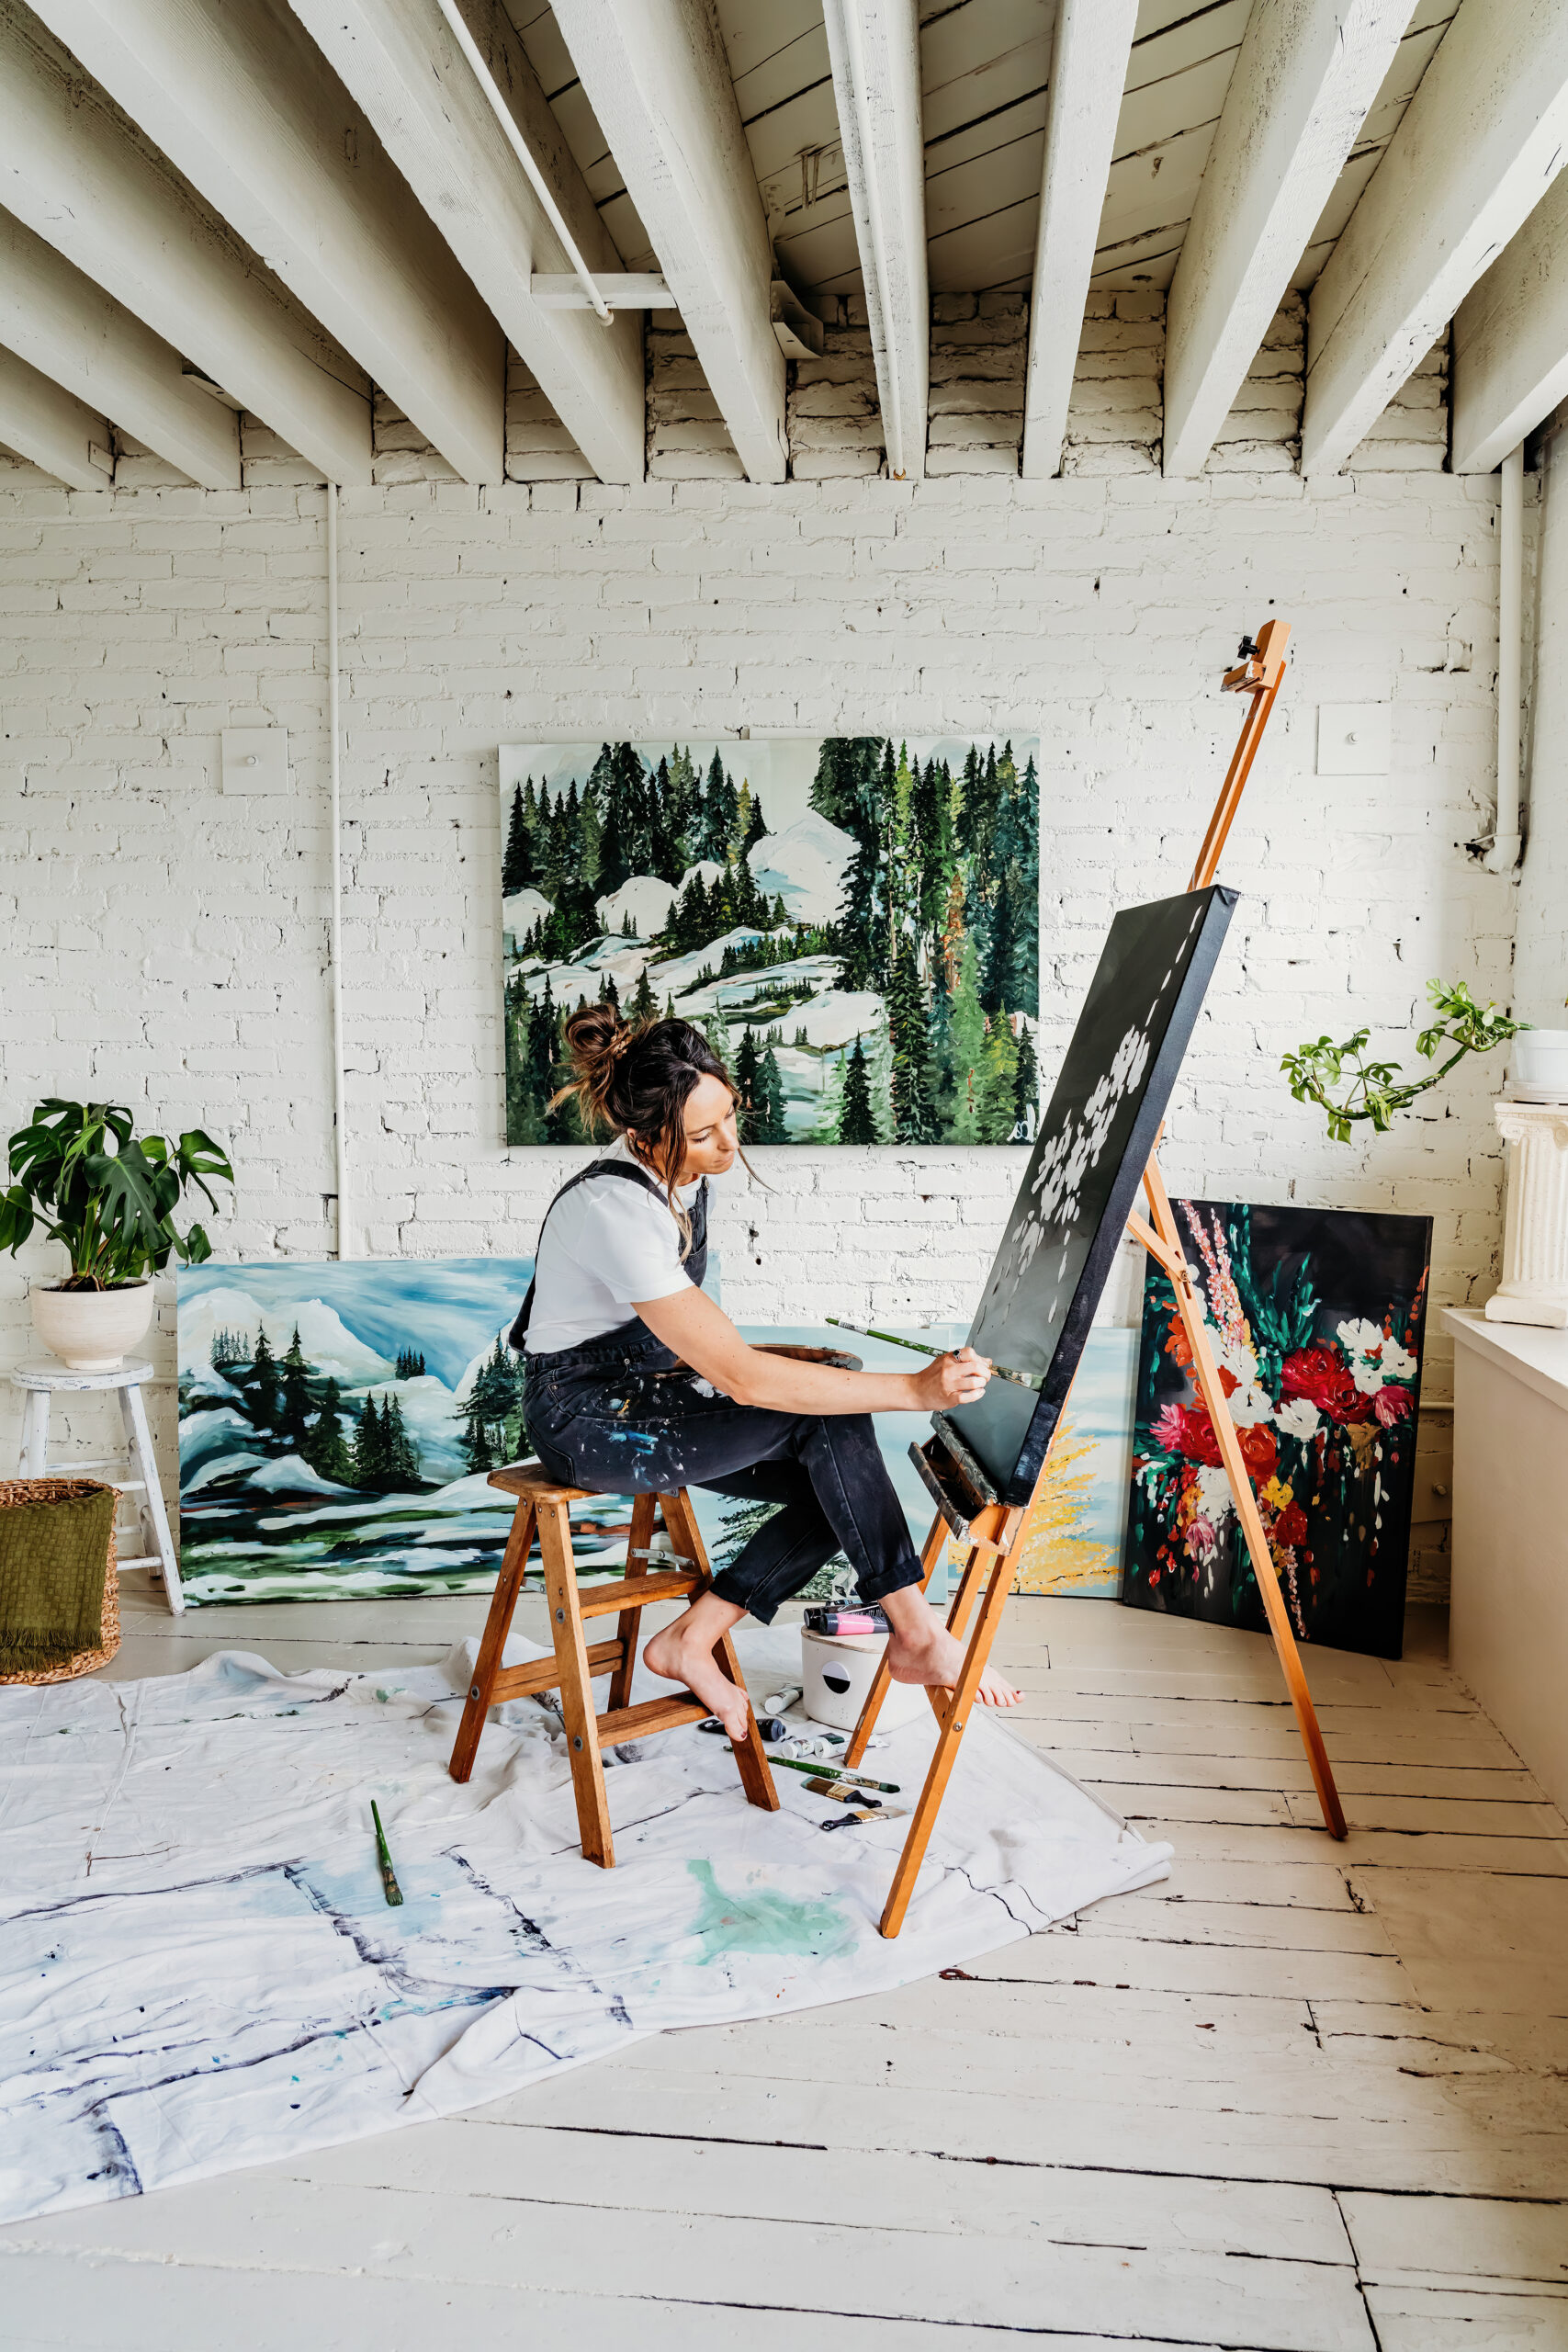 Branding photography for an artist to excel her painting business